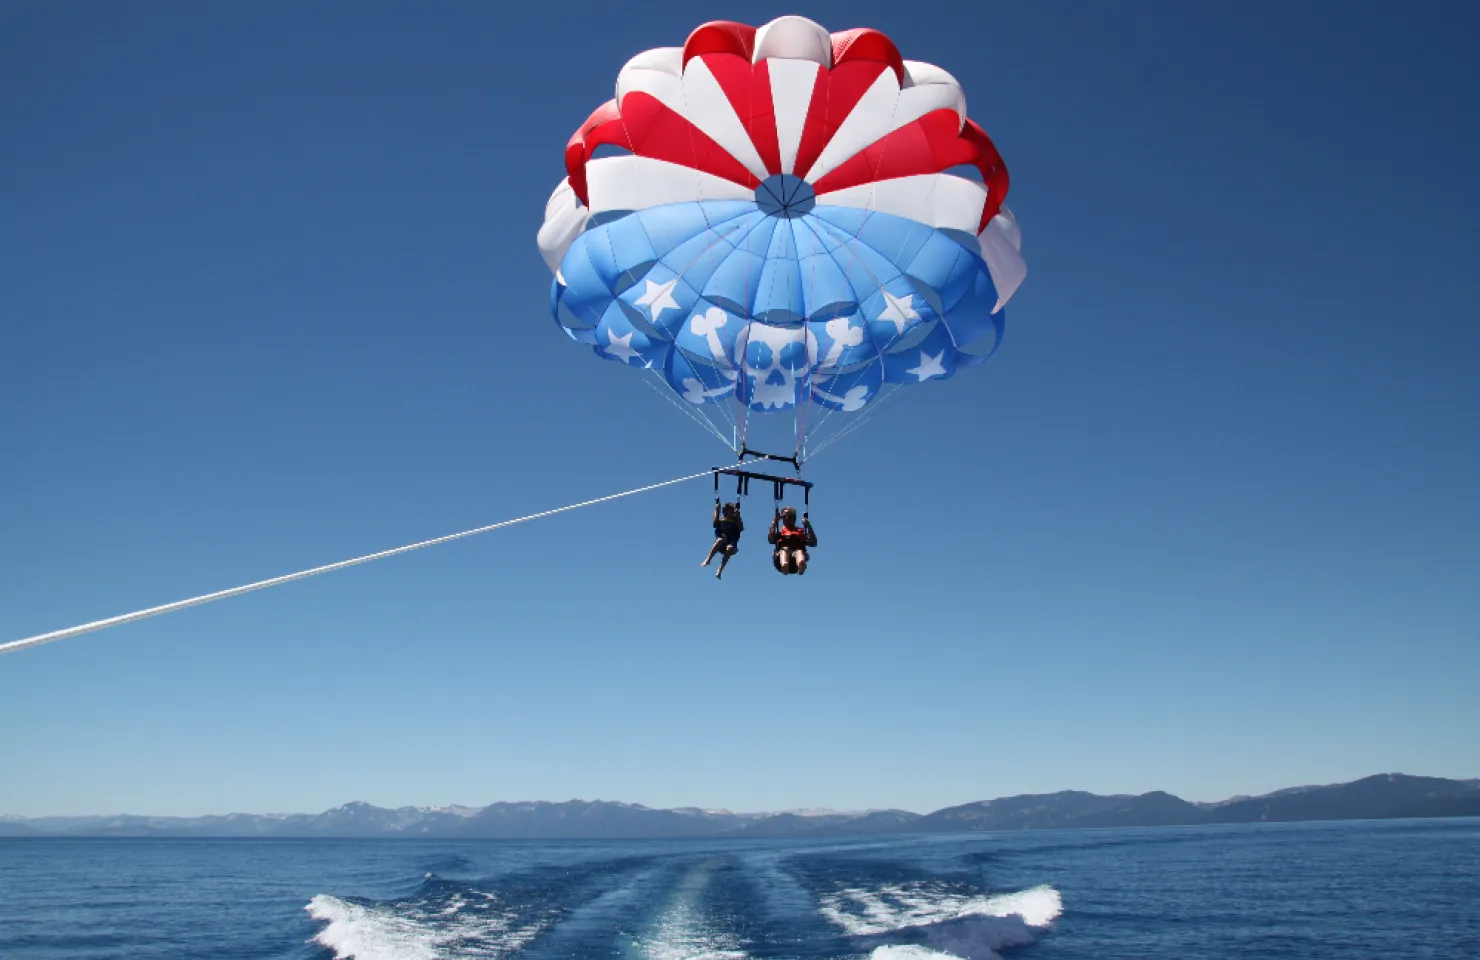 Parasailing In the Algarve - Best Boat Trips